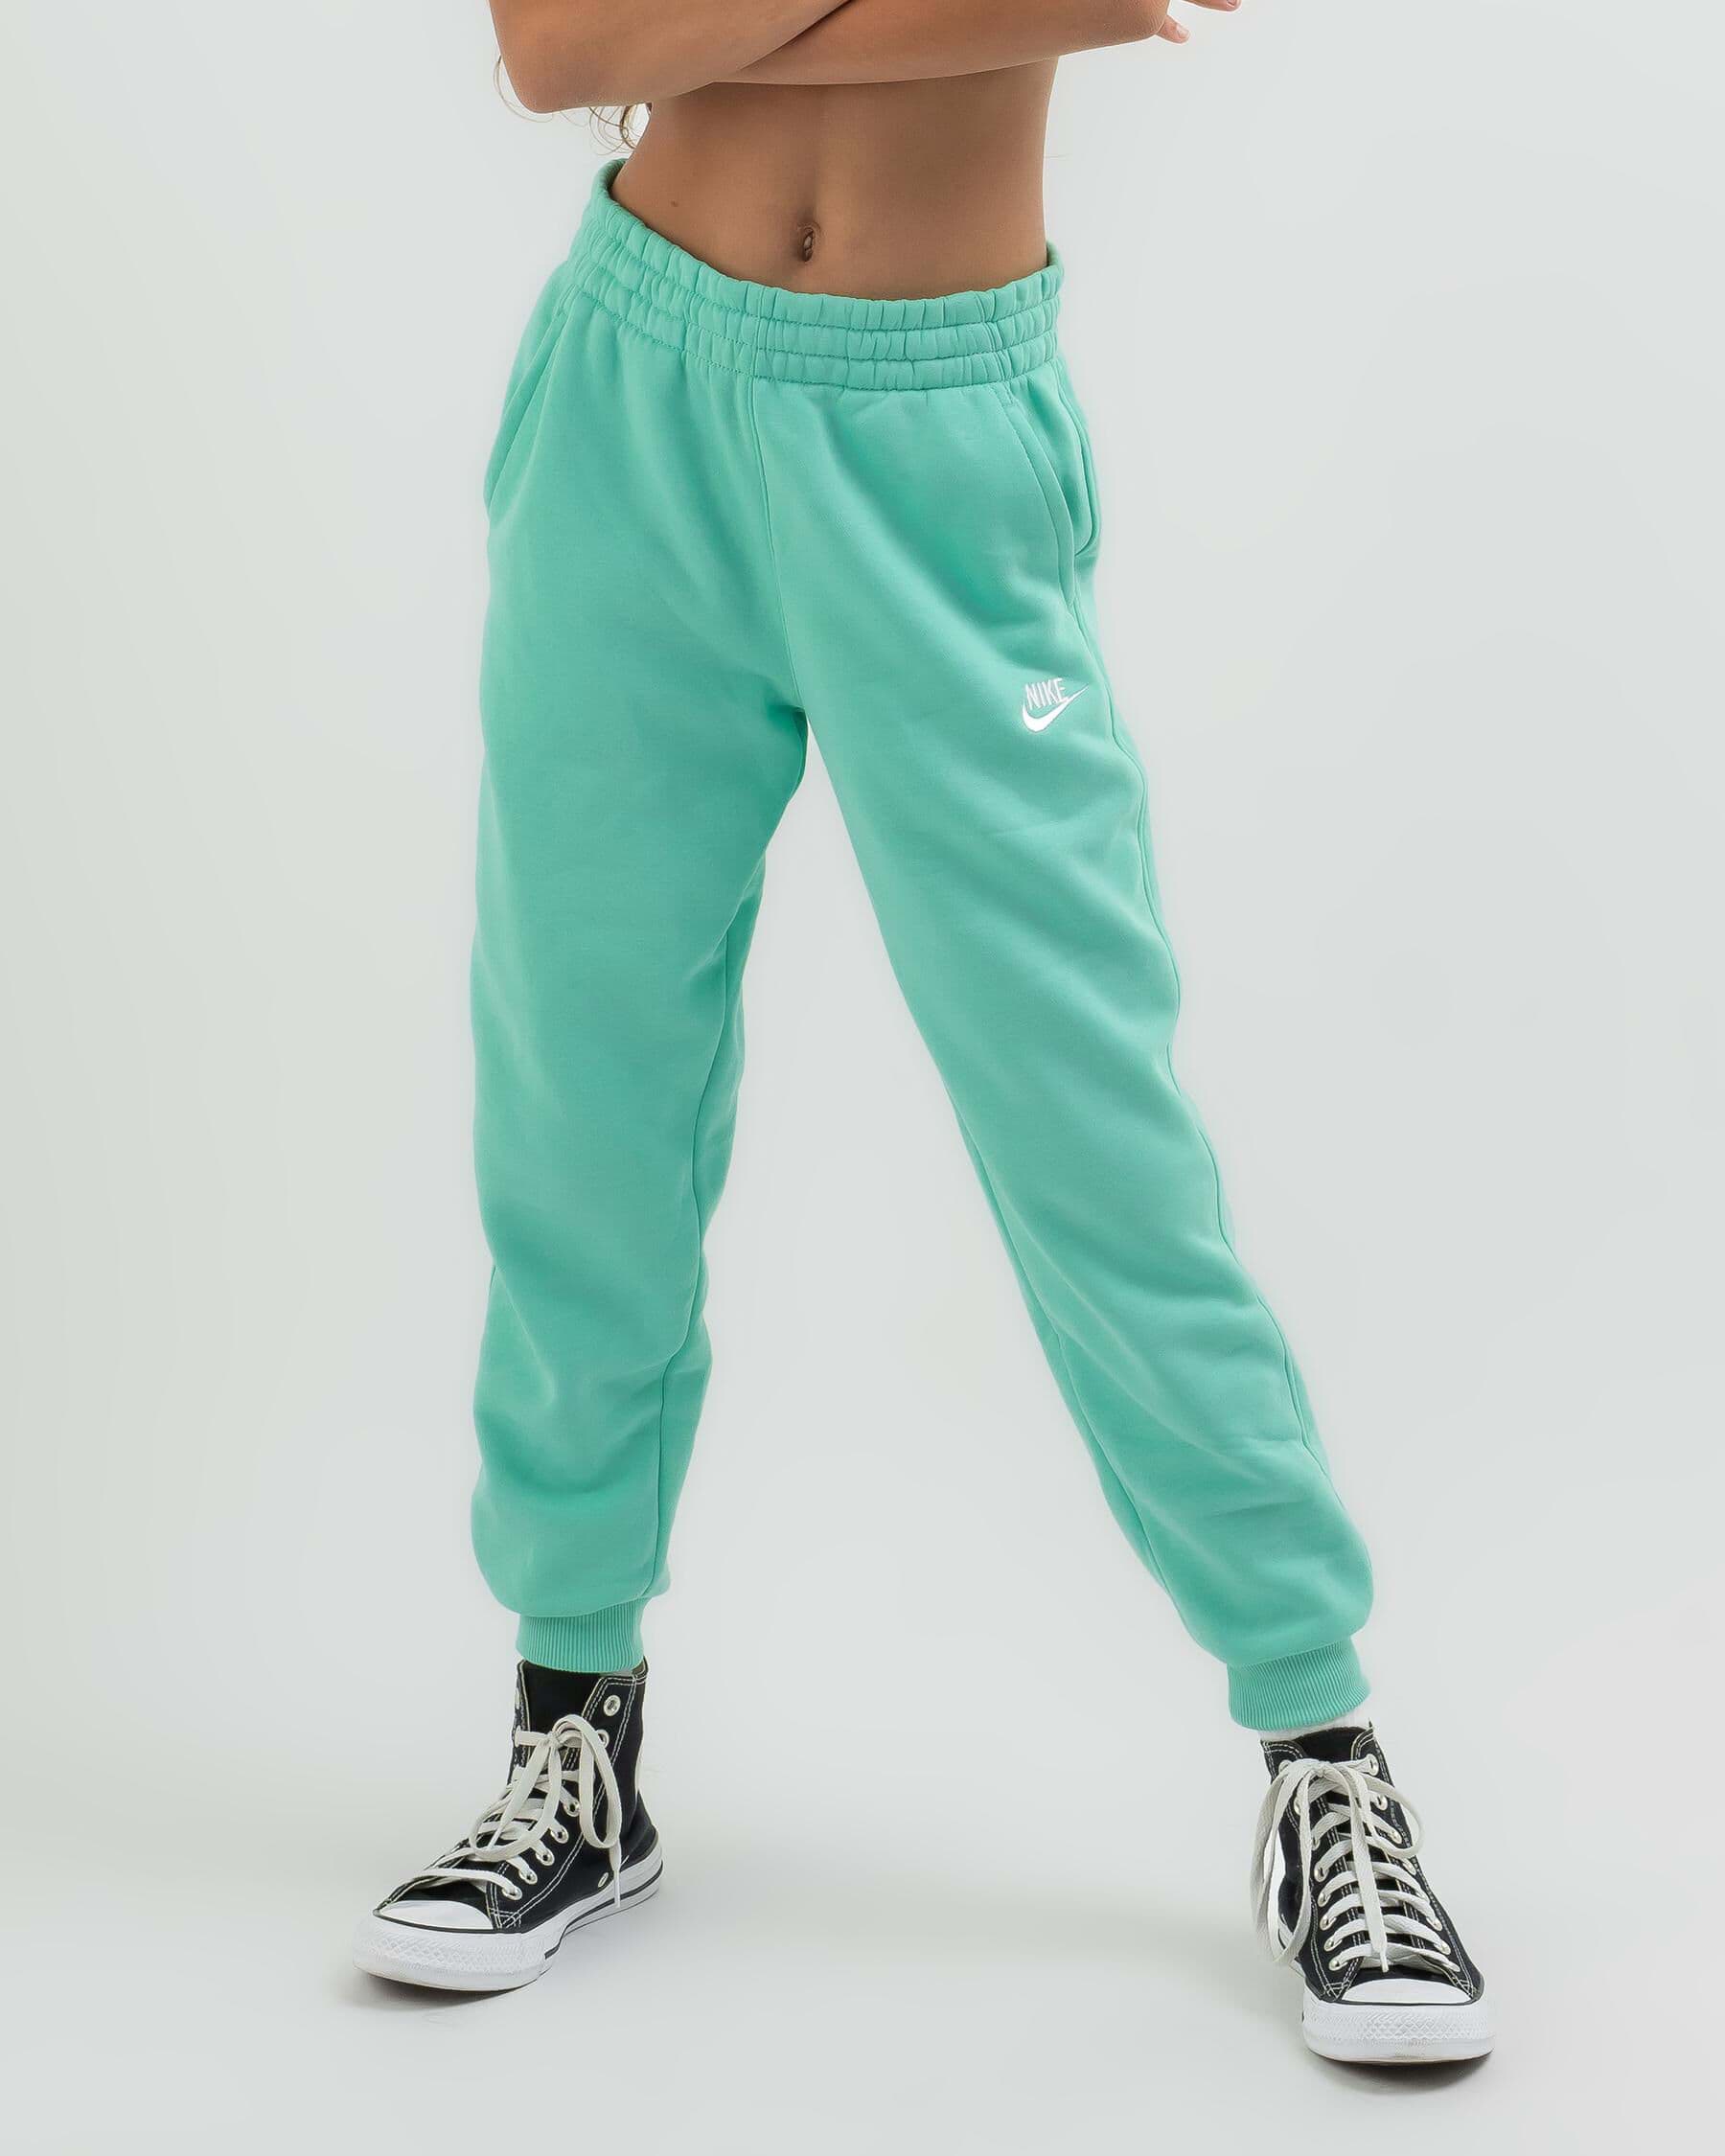 Amazon.in : women track pants | Track pants women, Clothes for women, Tops  for leggings